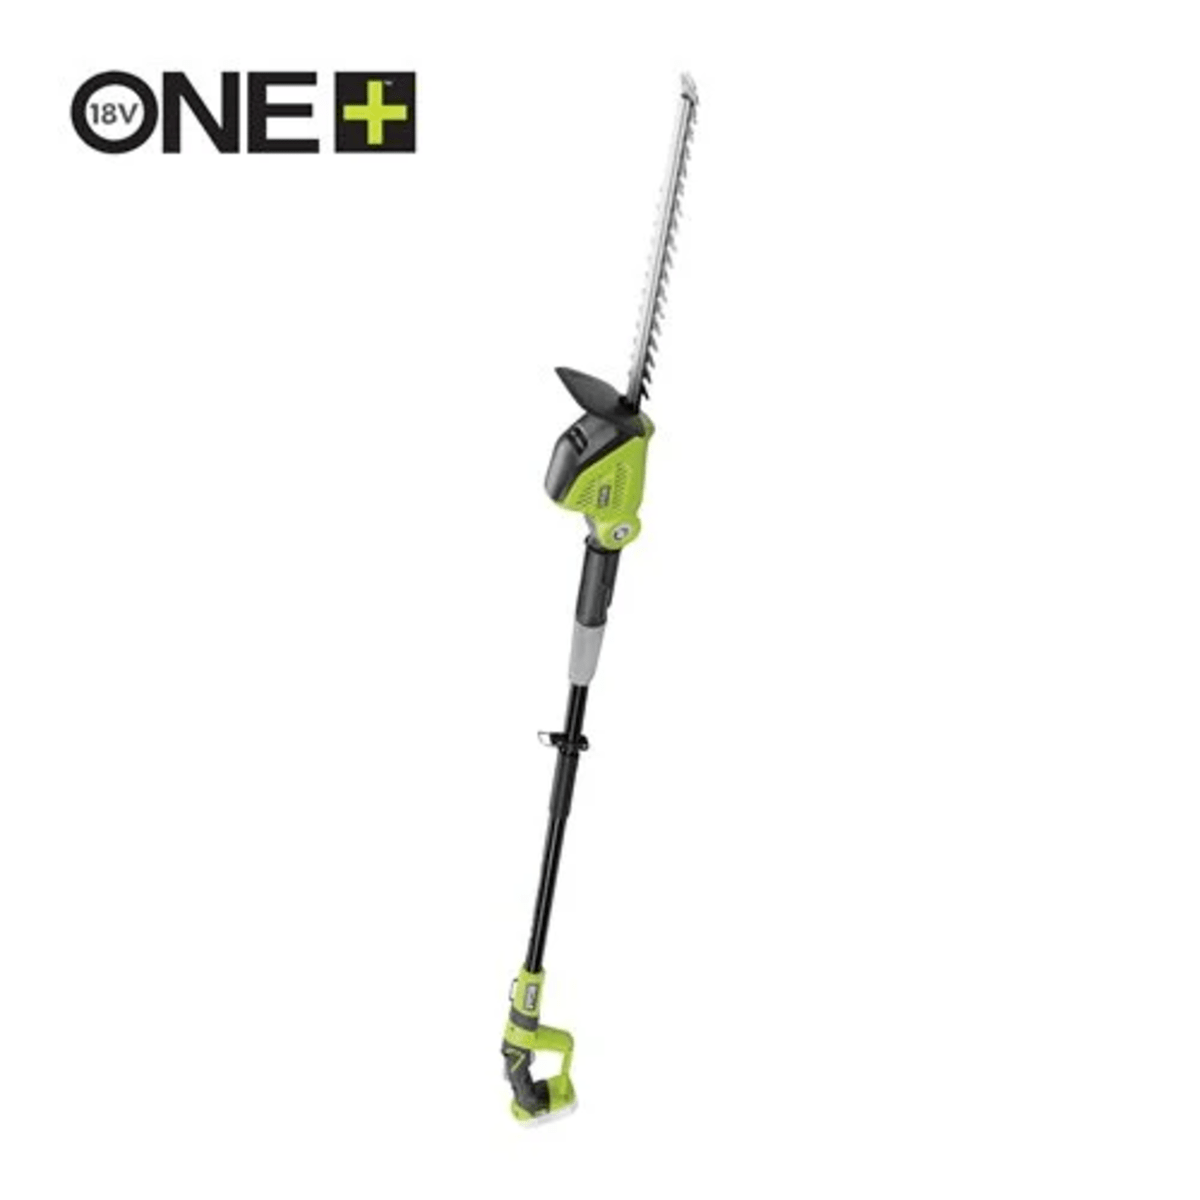 Taille-haies 18v one+ sans batterie ni chargeur opt1845